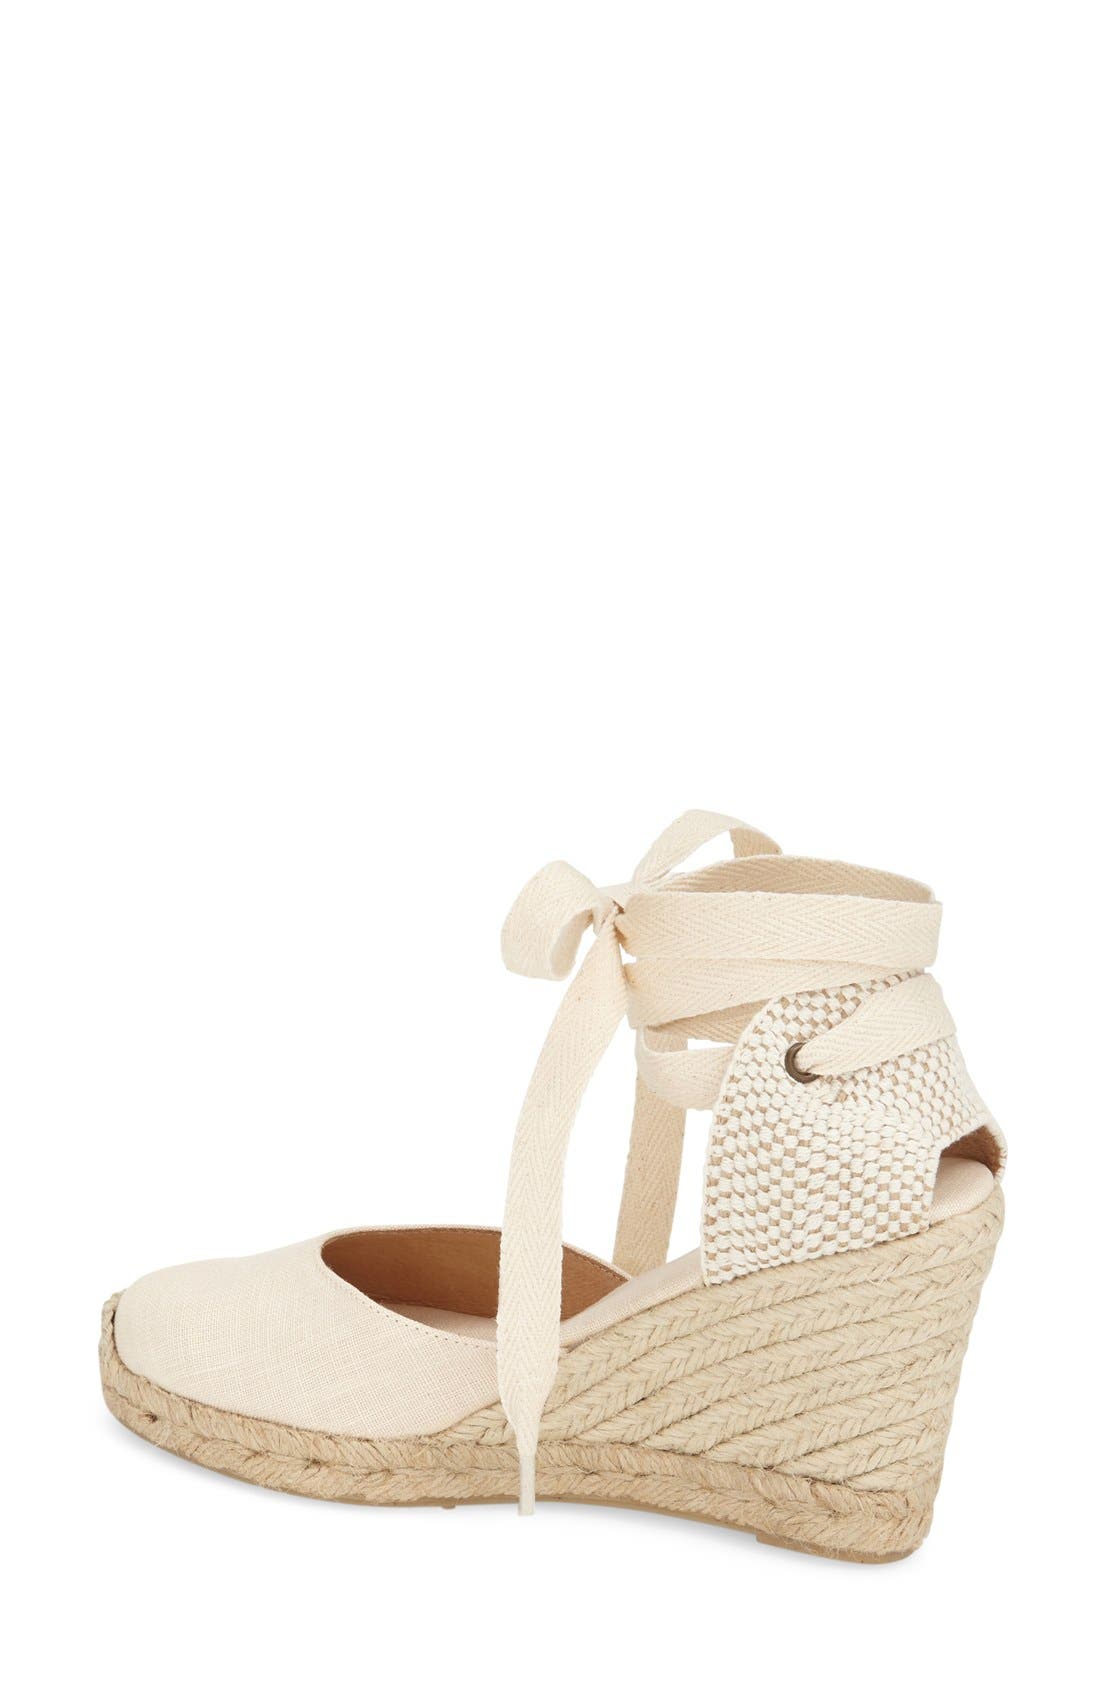 Soludos Canvas Ankle-Wrap Wedge Espadrilles In Blush | ModeSens